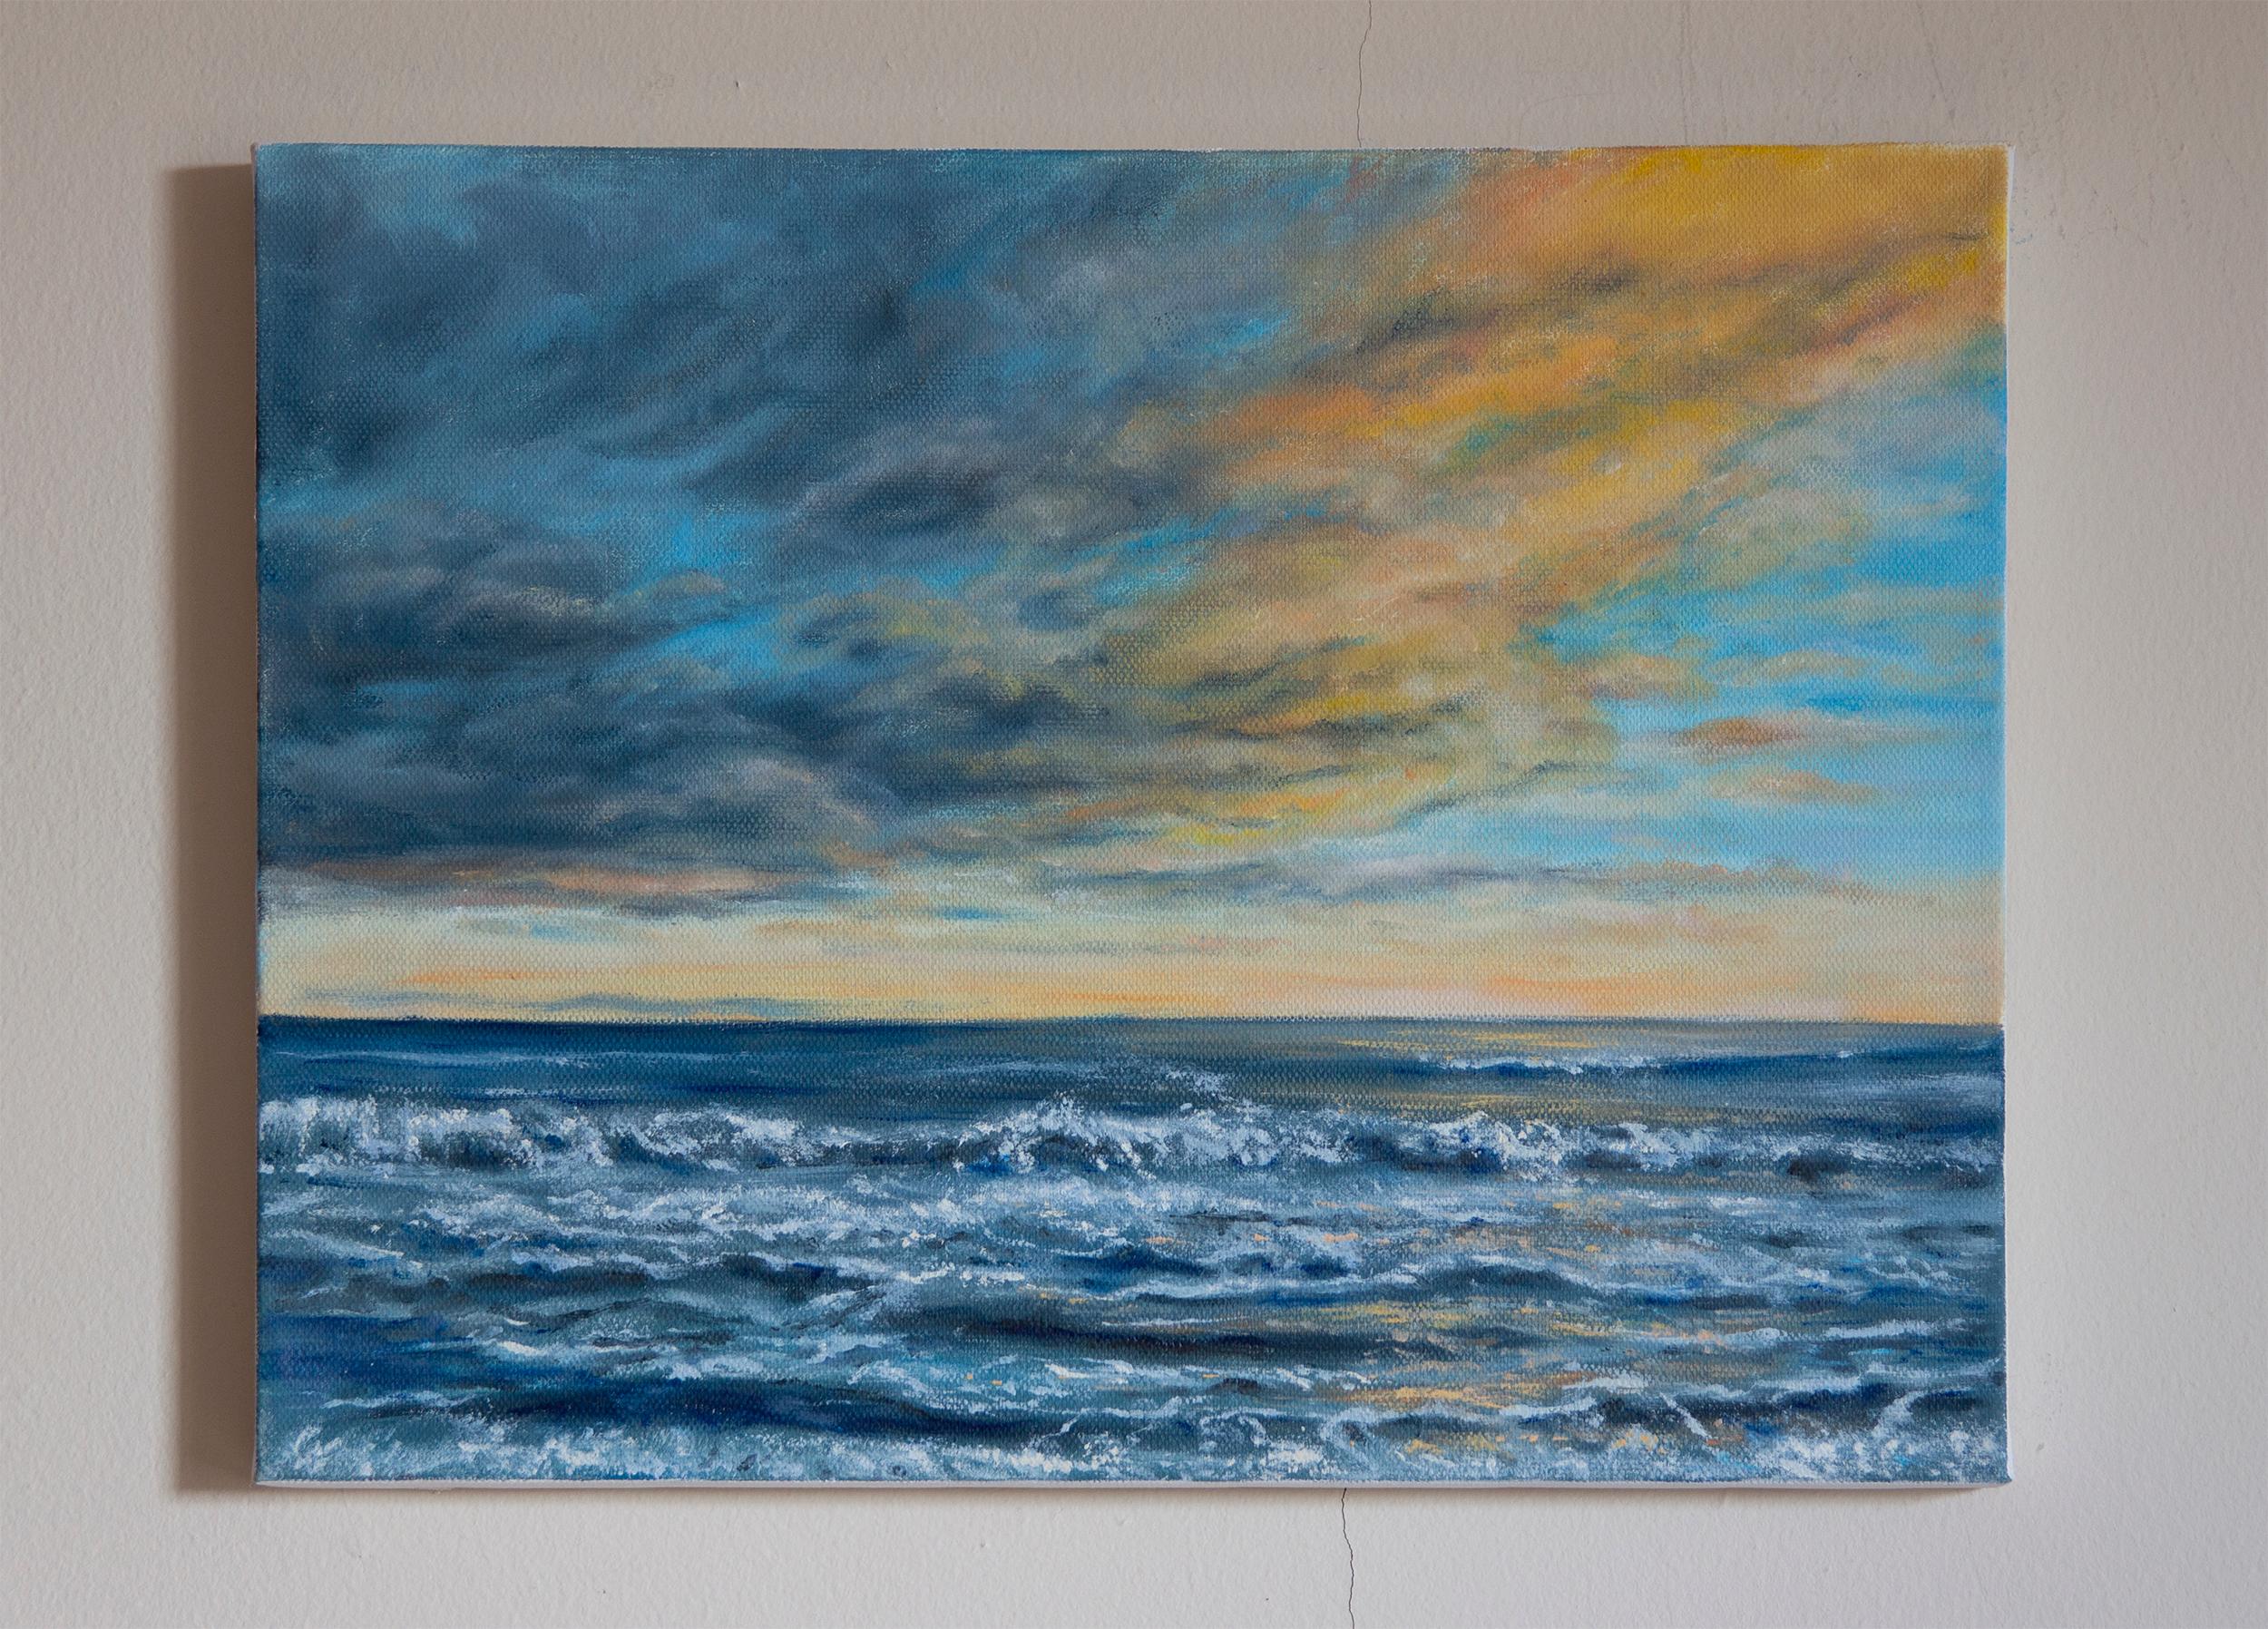 <p>Artist Comments<br />Inspired by the shores of the Hamptons, artist Olena Nabilsky paints crashing waves approaching an unseen shore. The interplay of bright light on dark clouds brings a soft, warm glow, casting golden reflections on the tides.